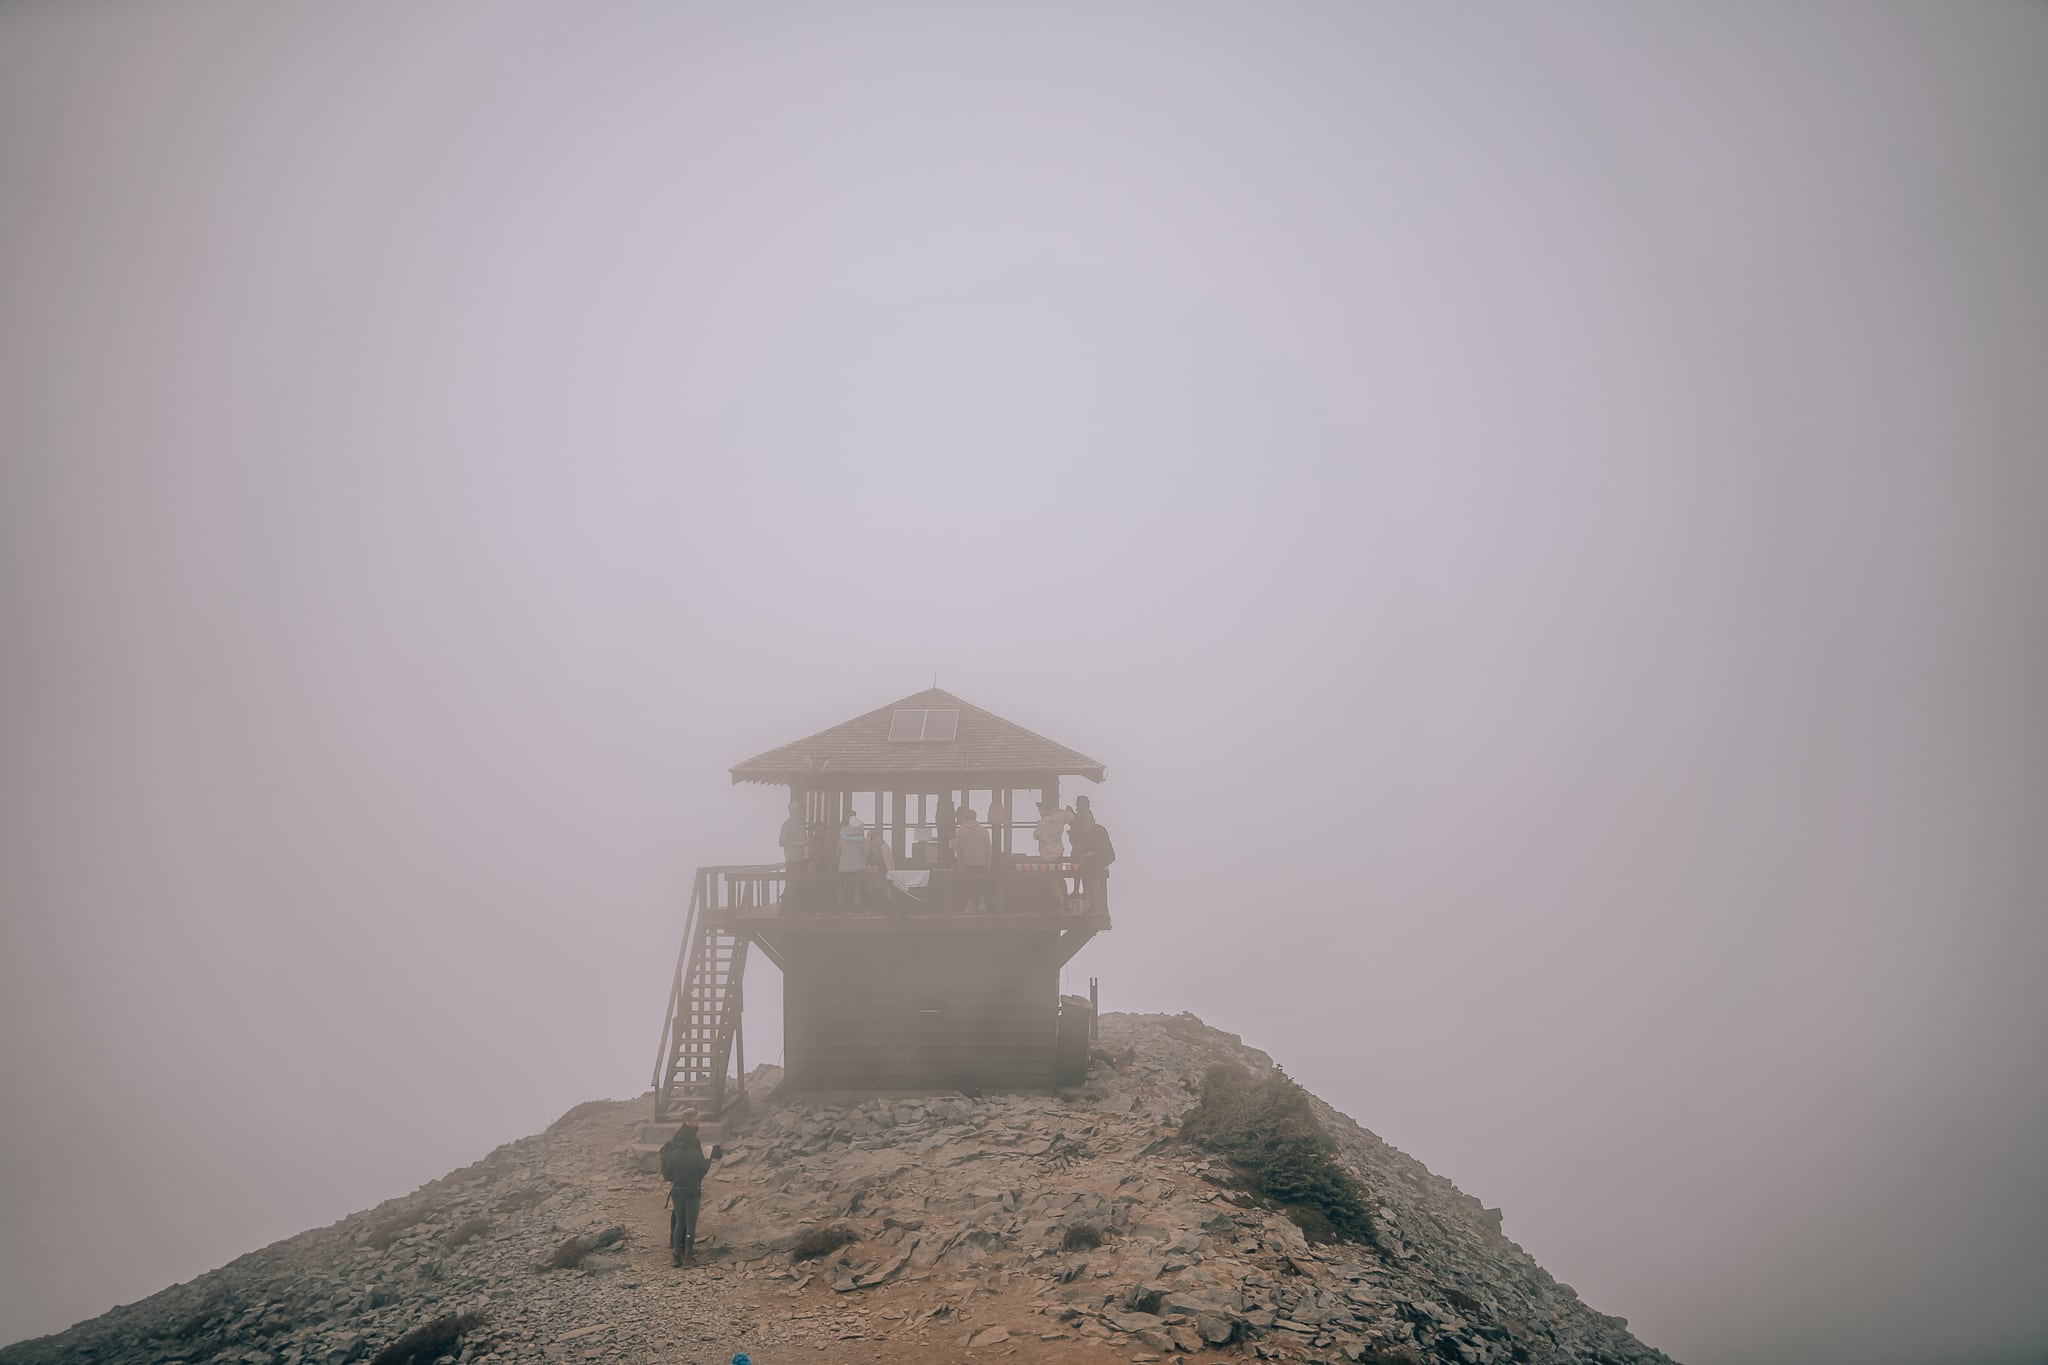 Fire tower surrounded fog and clouds with no view behind